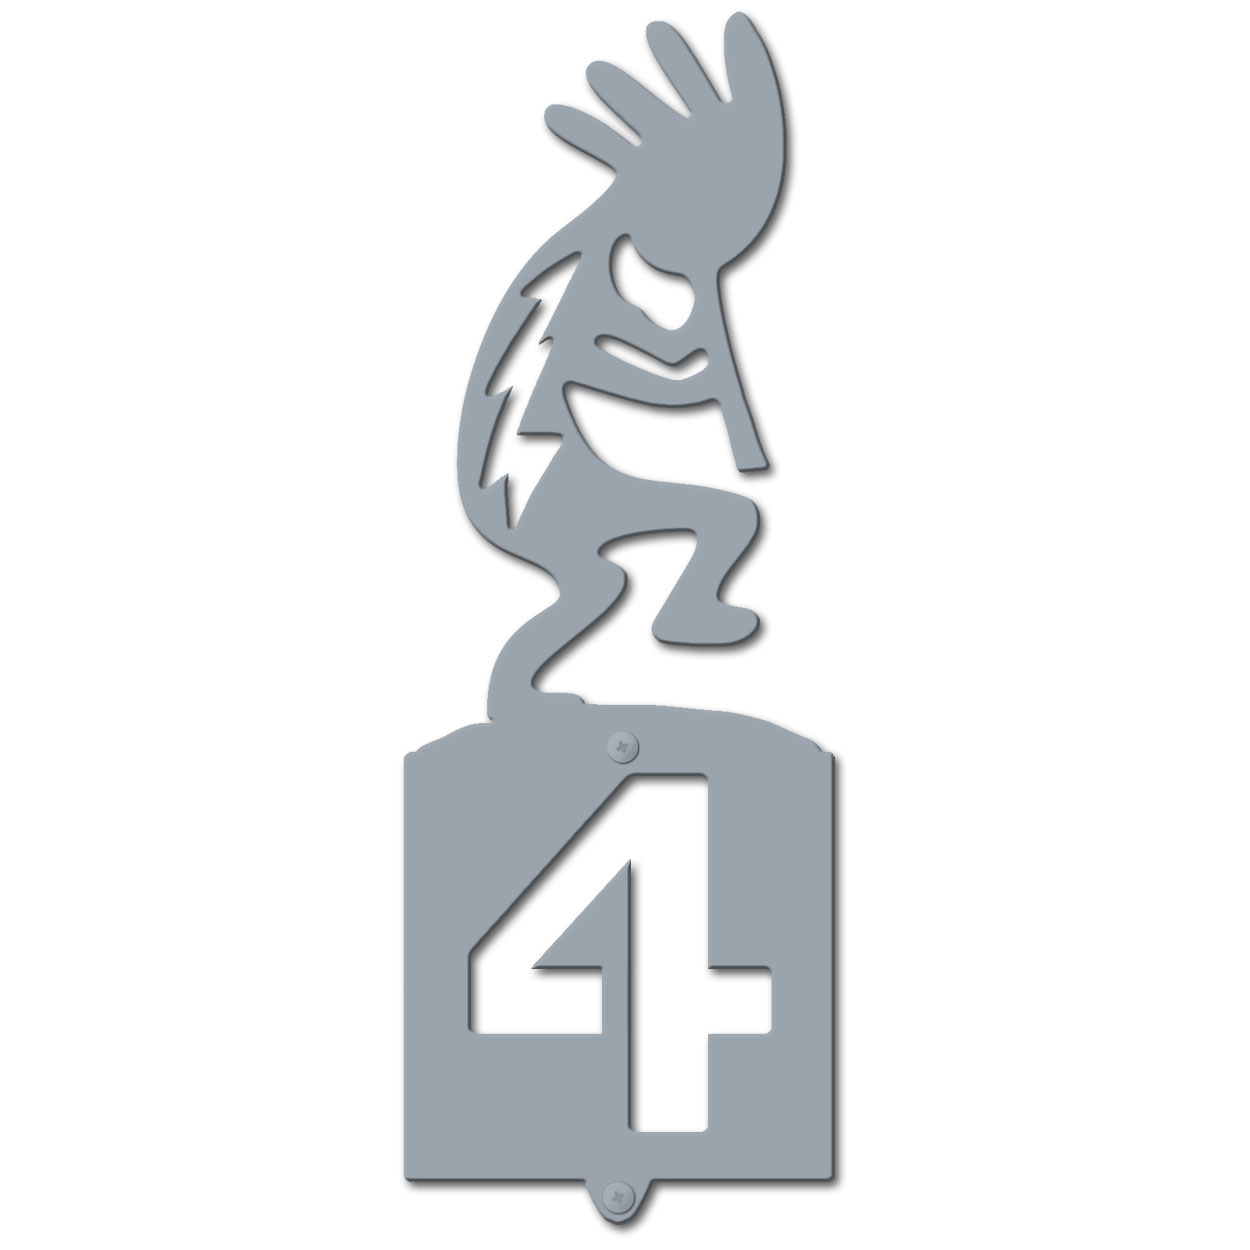 635111 - Kokopelli Cut Outs One Digit Address Number Plaque